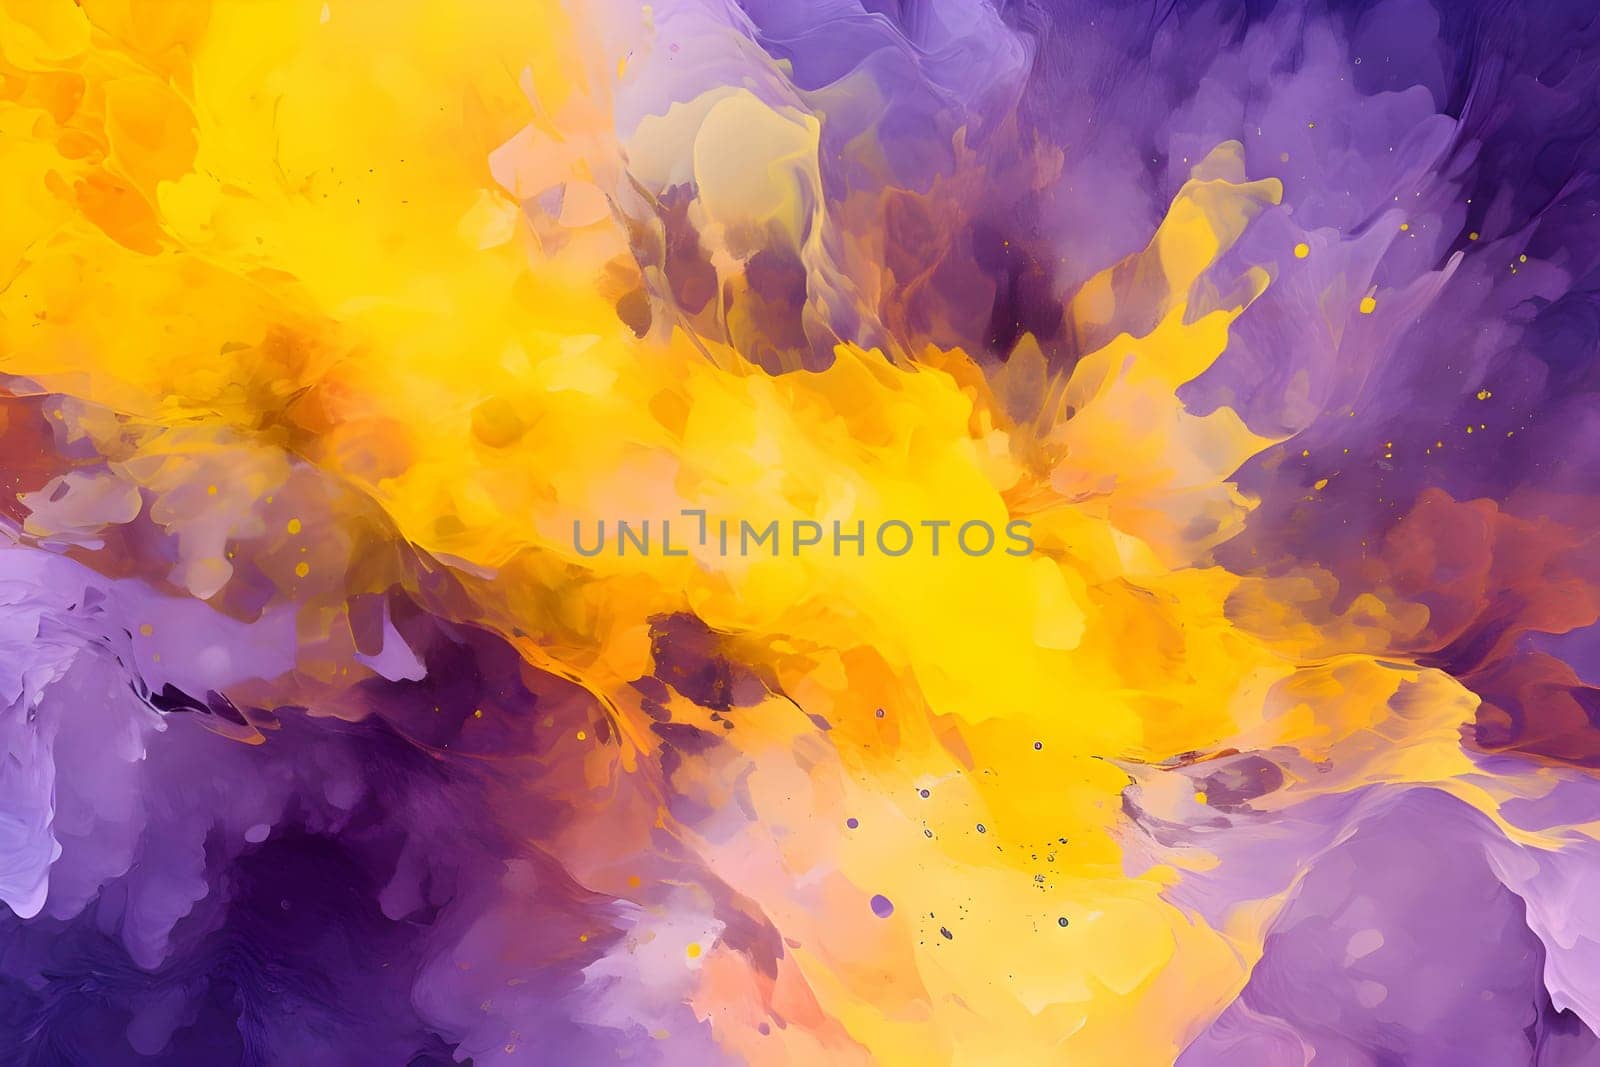 An abstract background transitioning from purple to yellow, resembling watercolor ink, creating a visually captivating and artistic design.